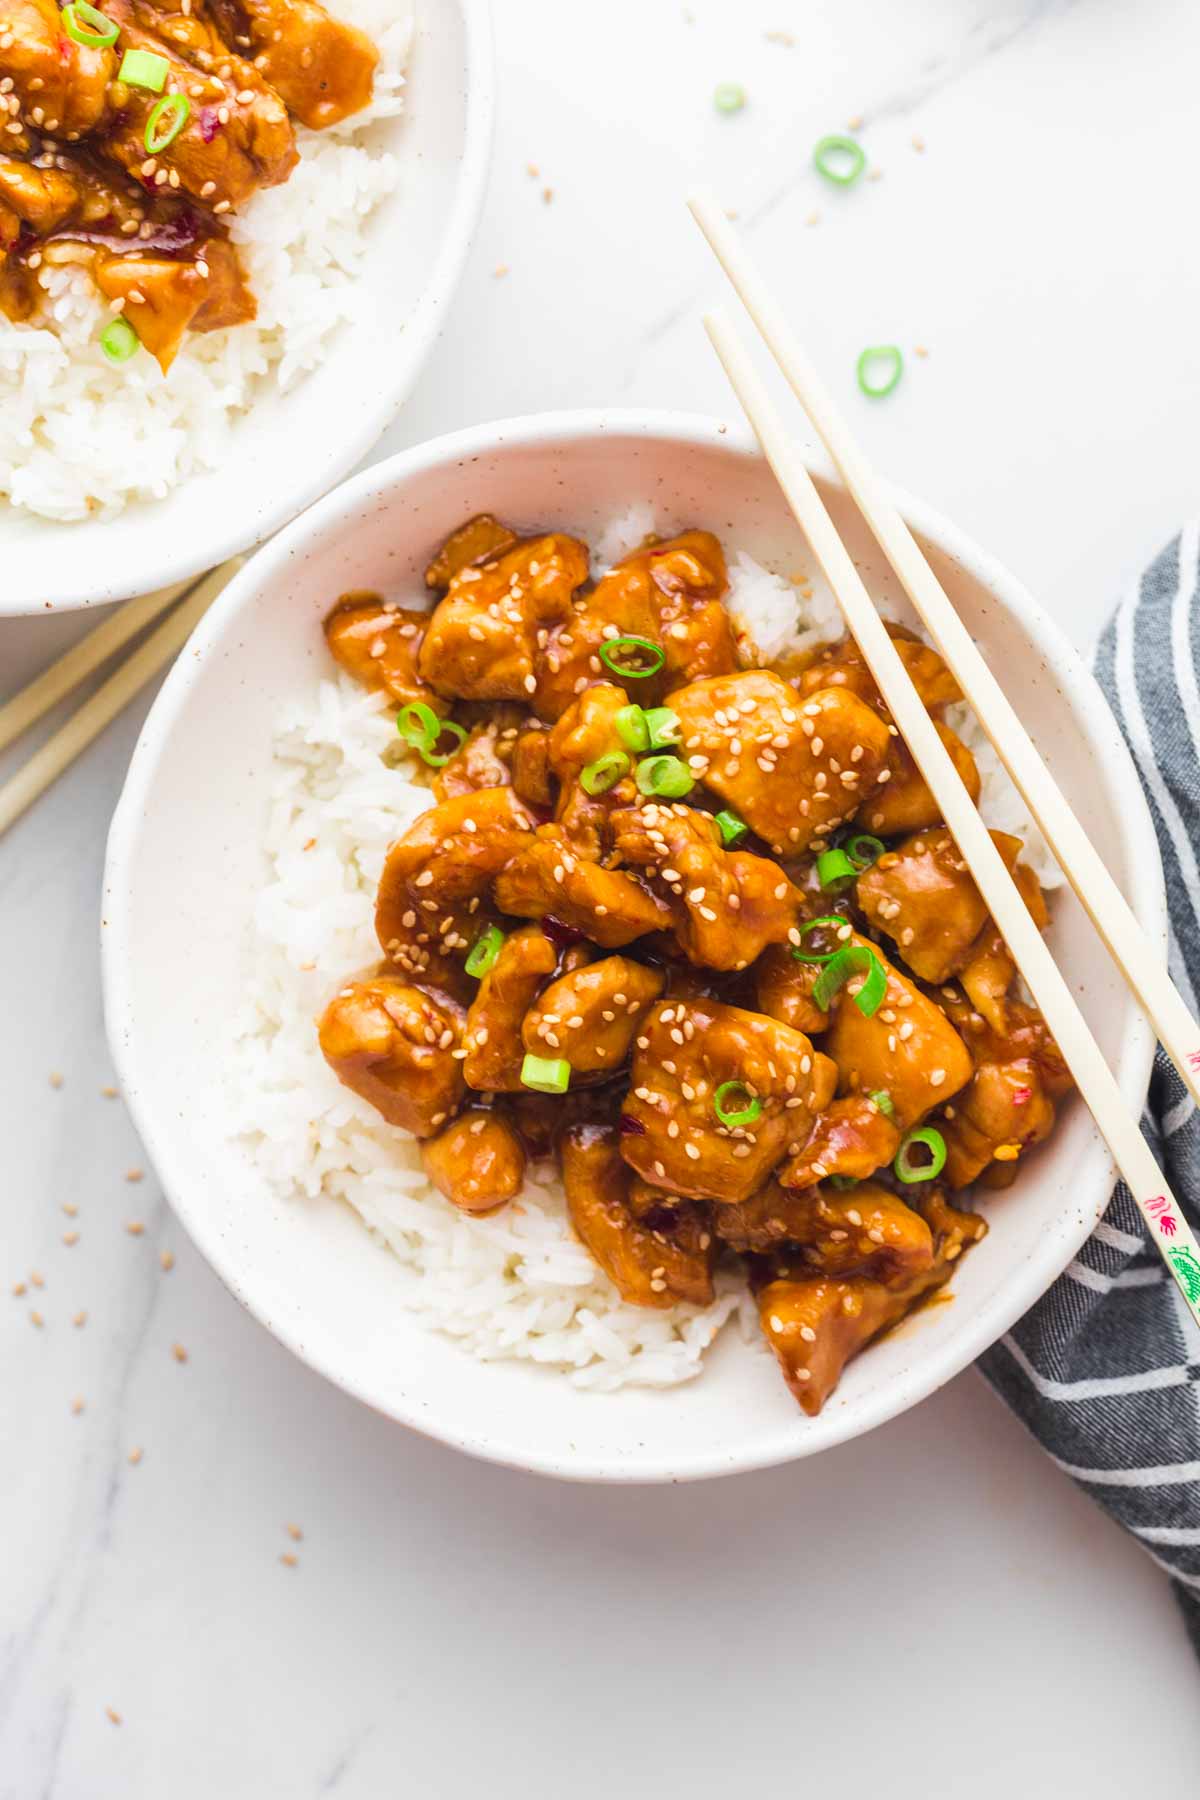 Glazed chicken served over steamed rice in white bowls, and chop sticks on the side